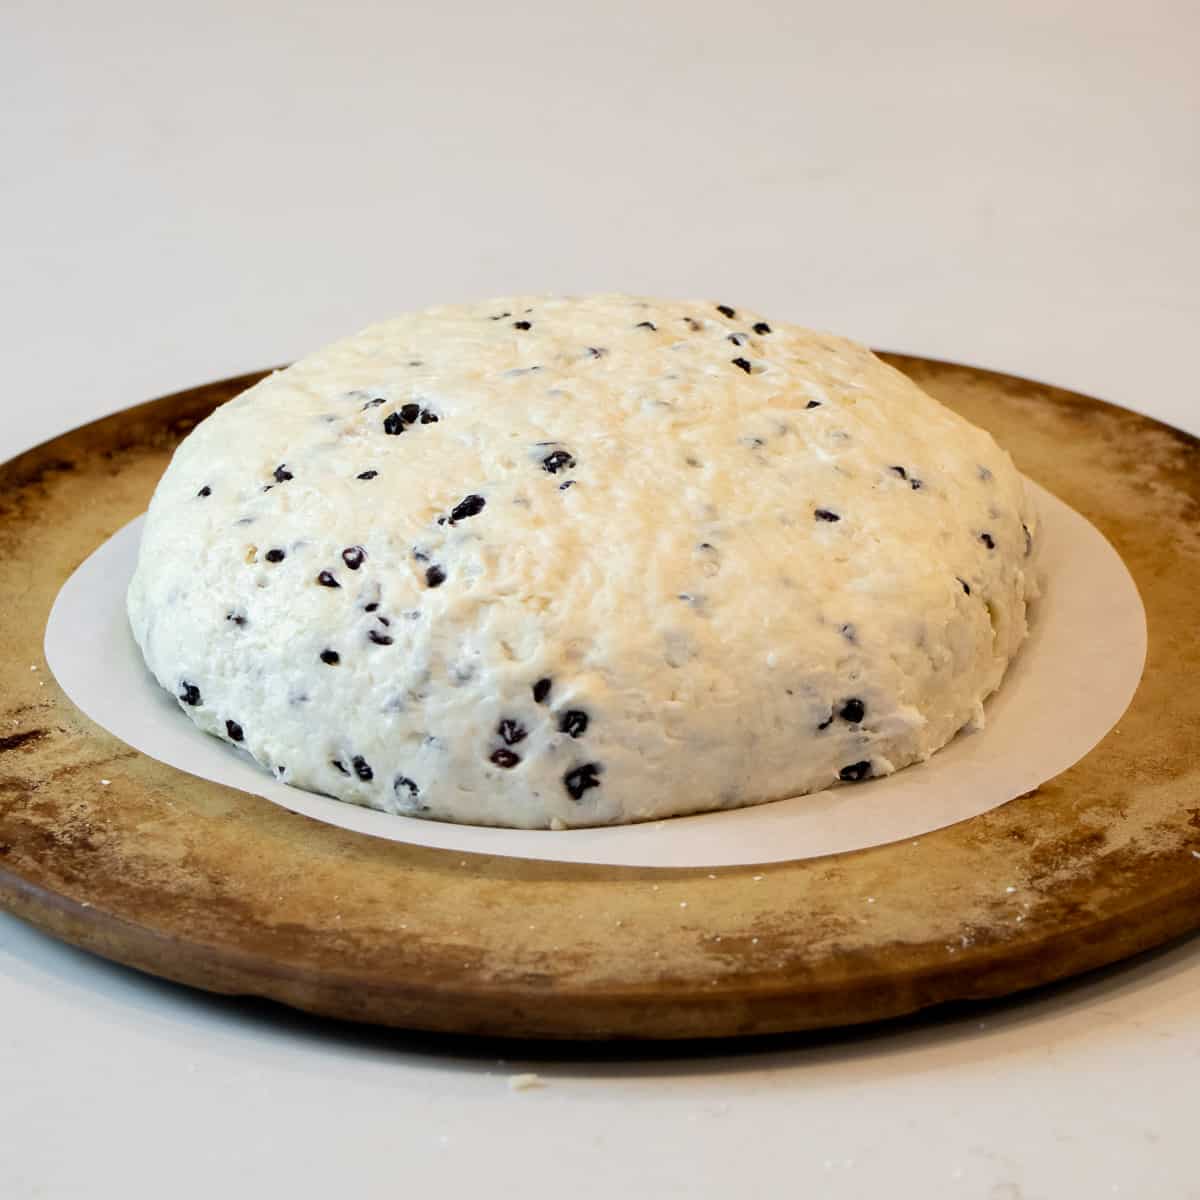 Bread dough formed into a loaf and placed on a pizza stone.